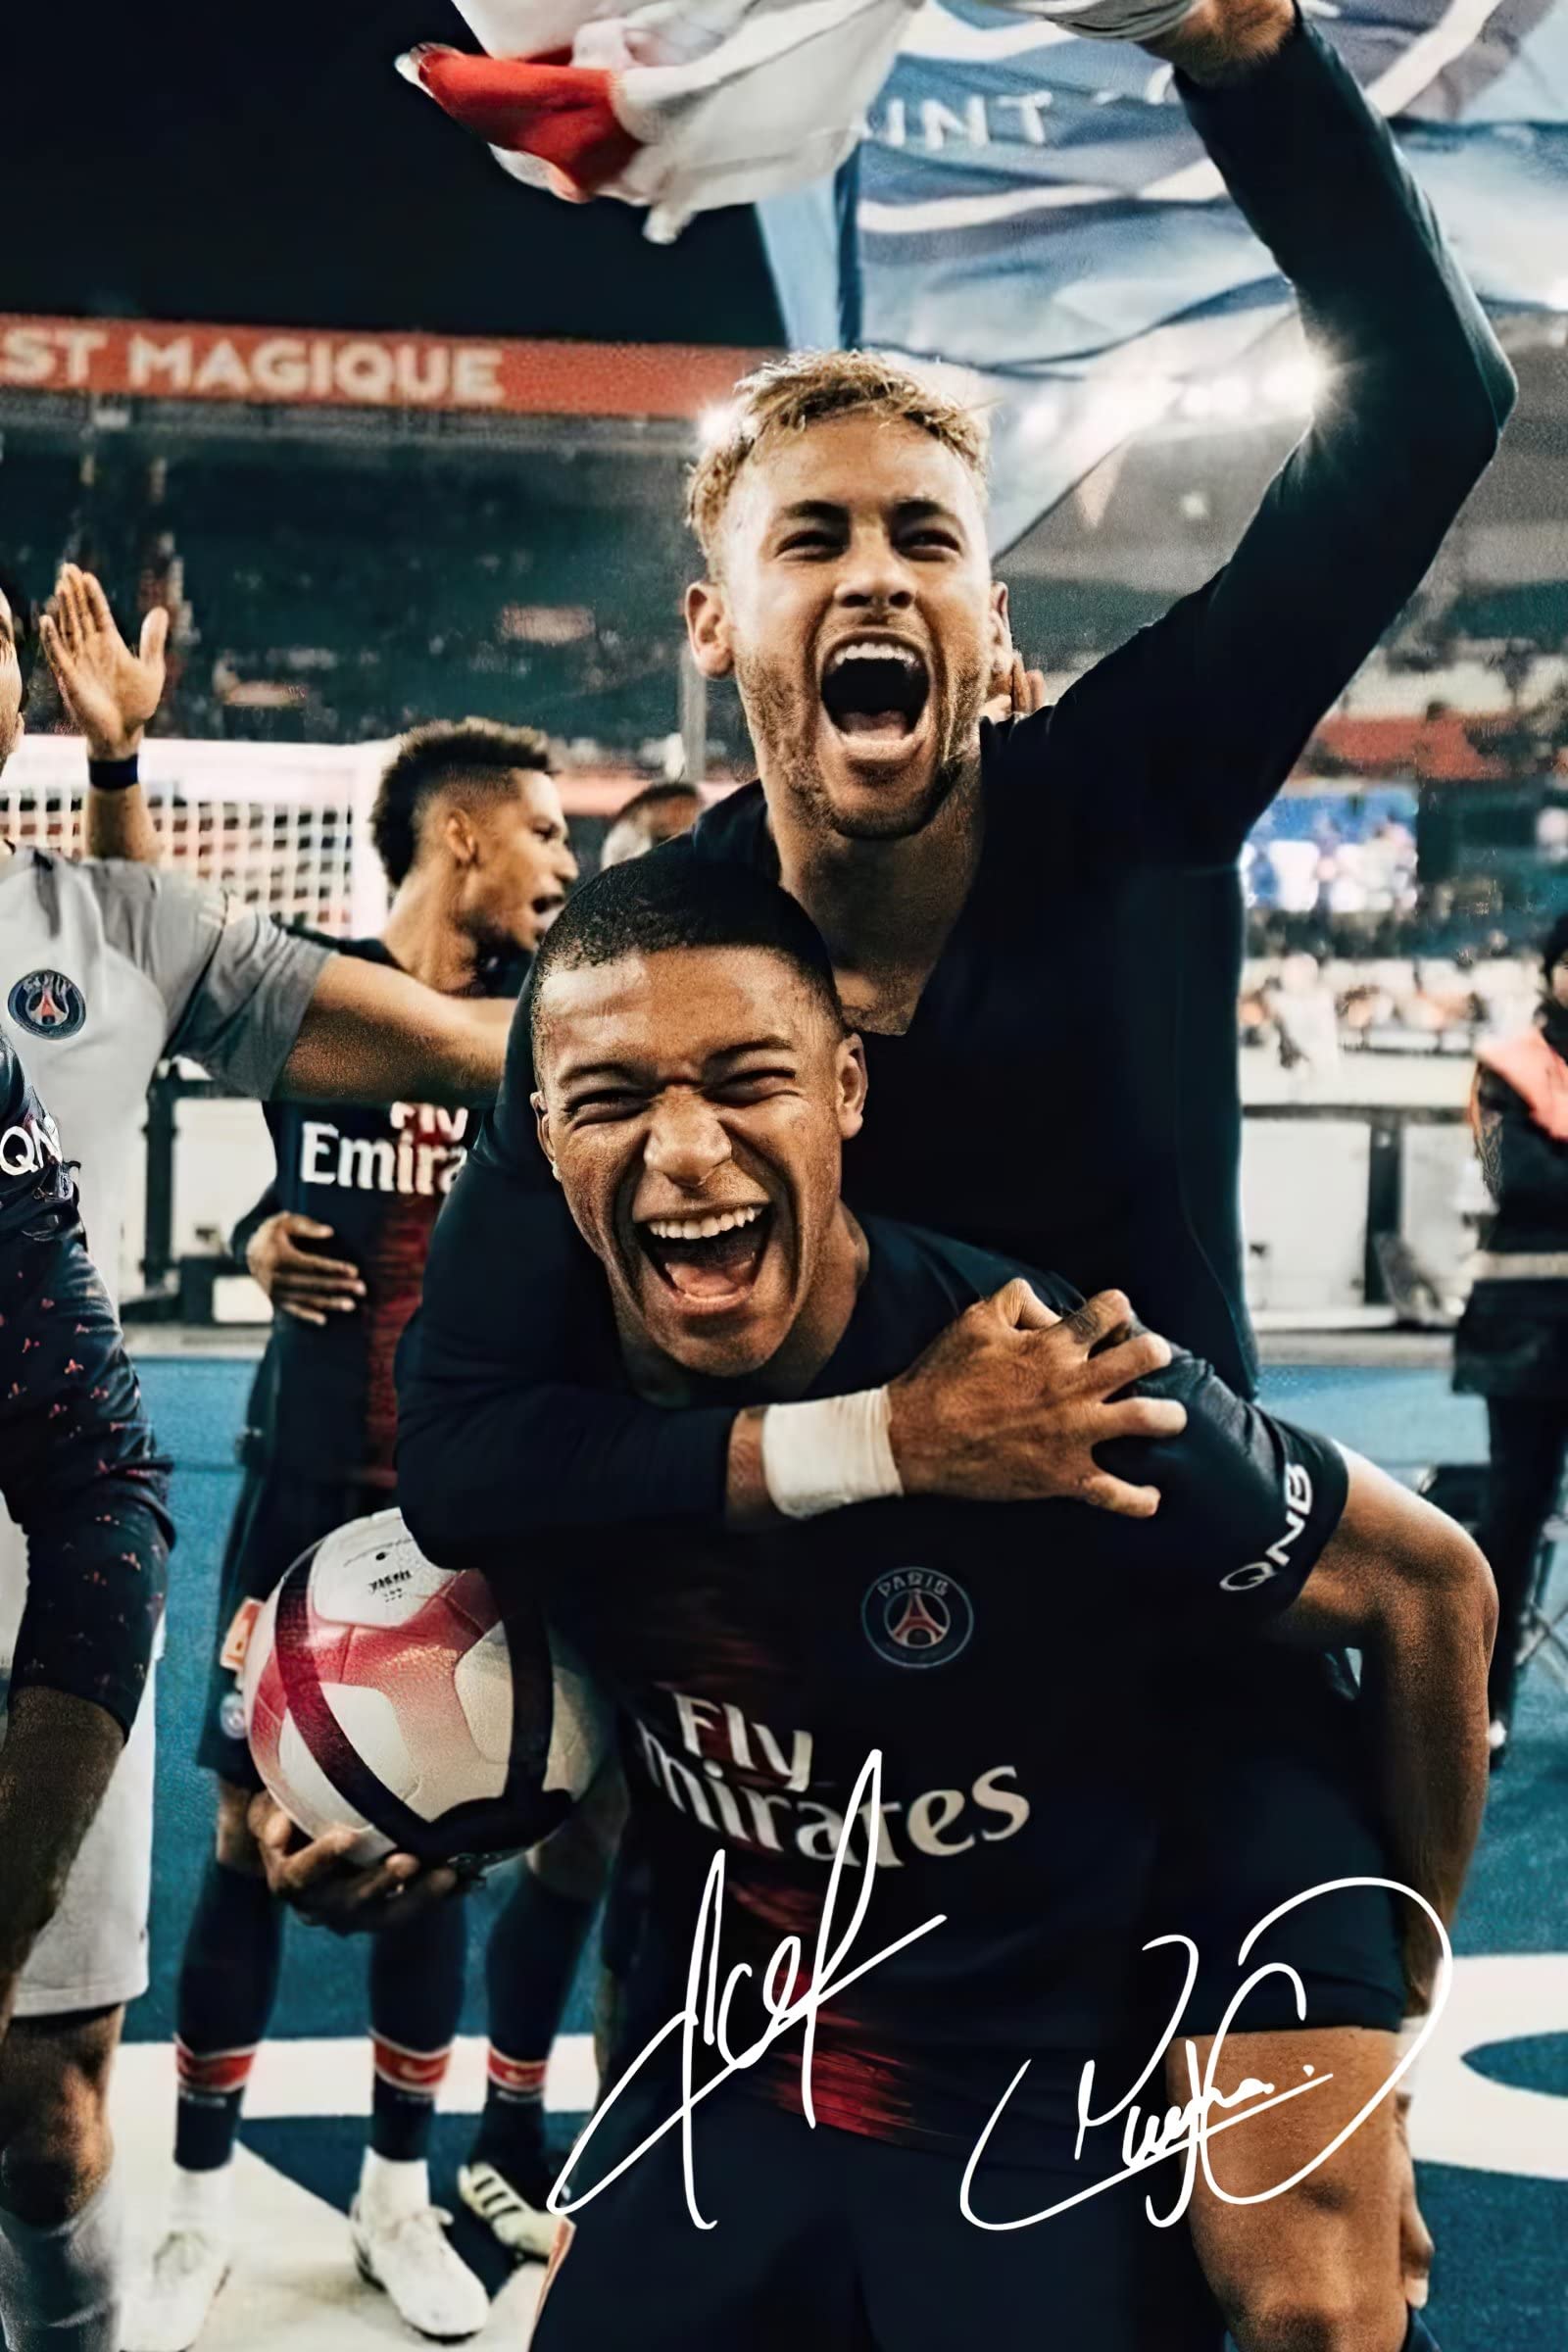 GOMORE Neymar Canvas Poster unframed 12x18 Inches Football Poster neymar jr poster Signature Wall posters for room aesthetic : Amazon.ca: Sports & Outdoors